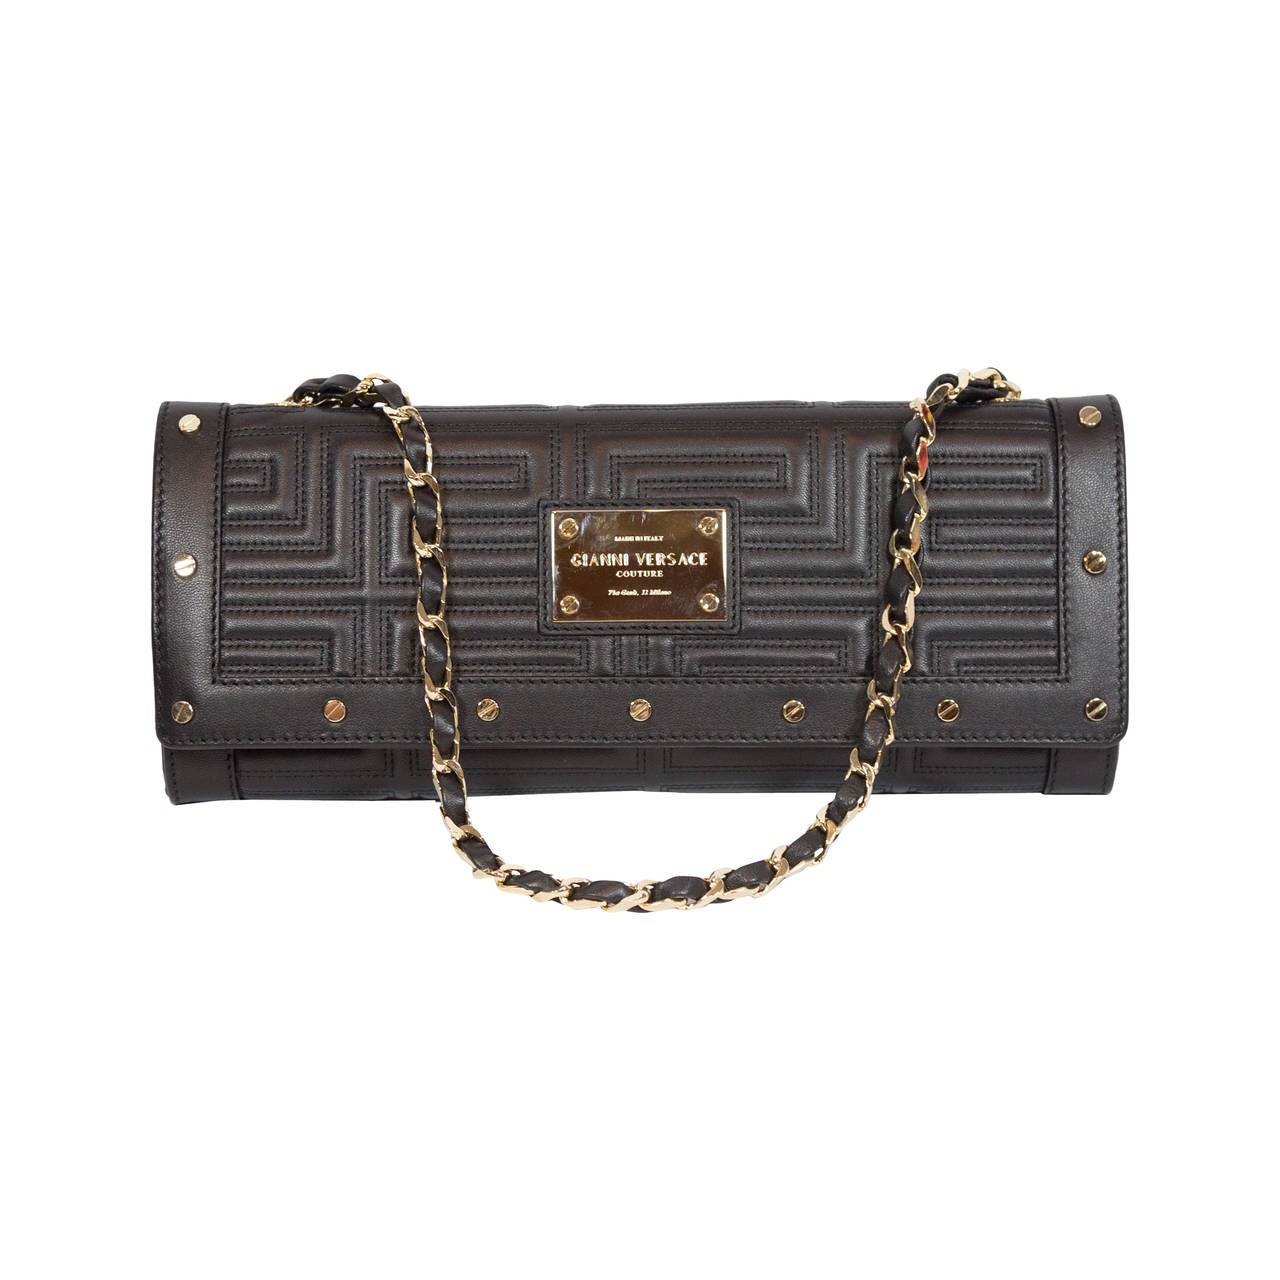 Gianni Versace Black Patent Leather Clutch